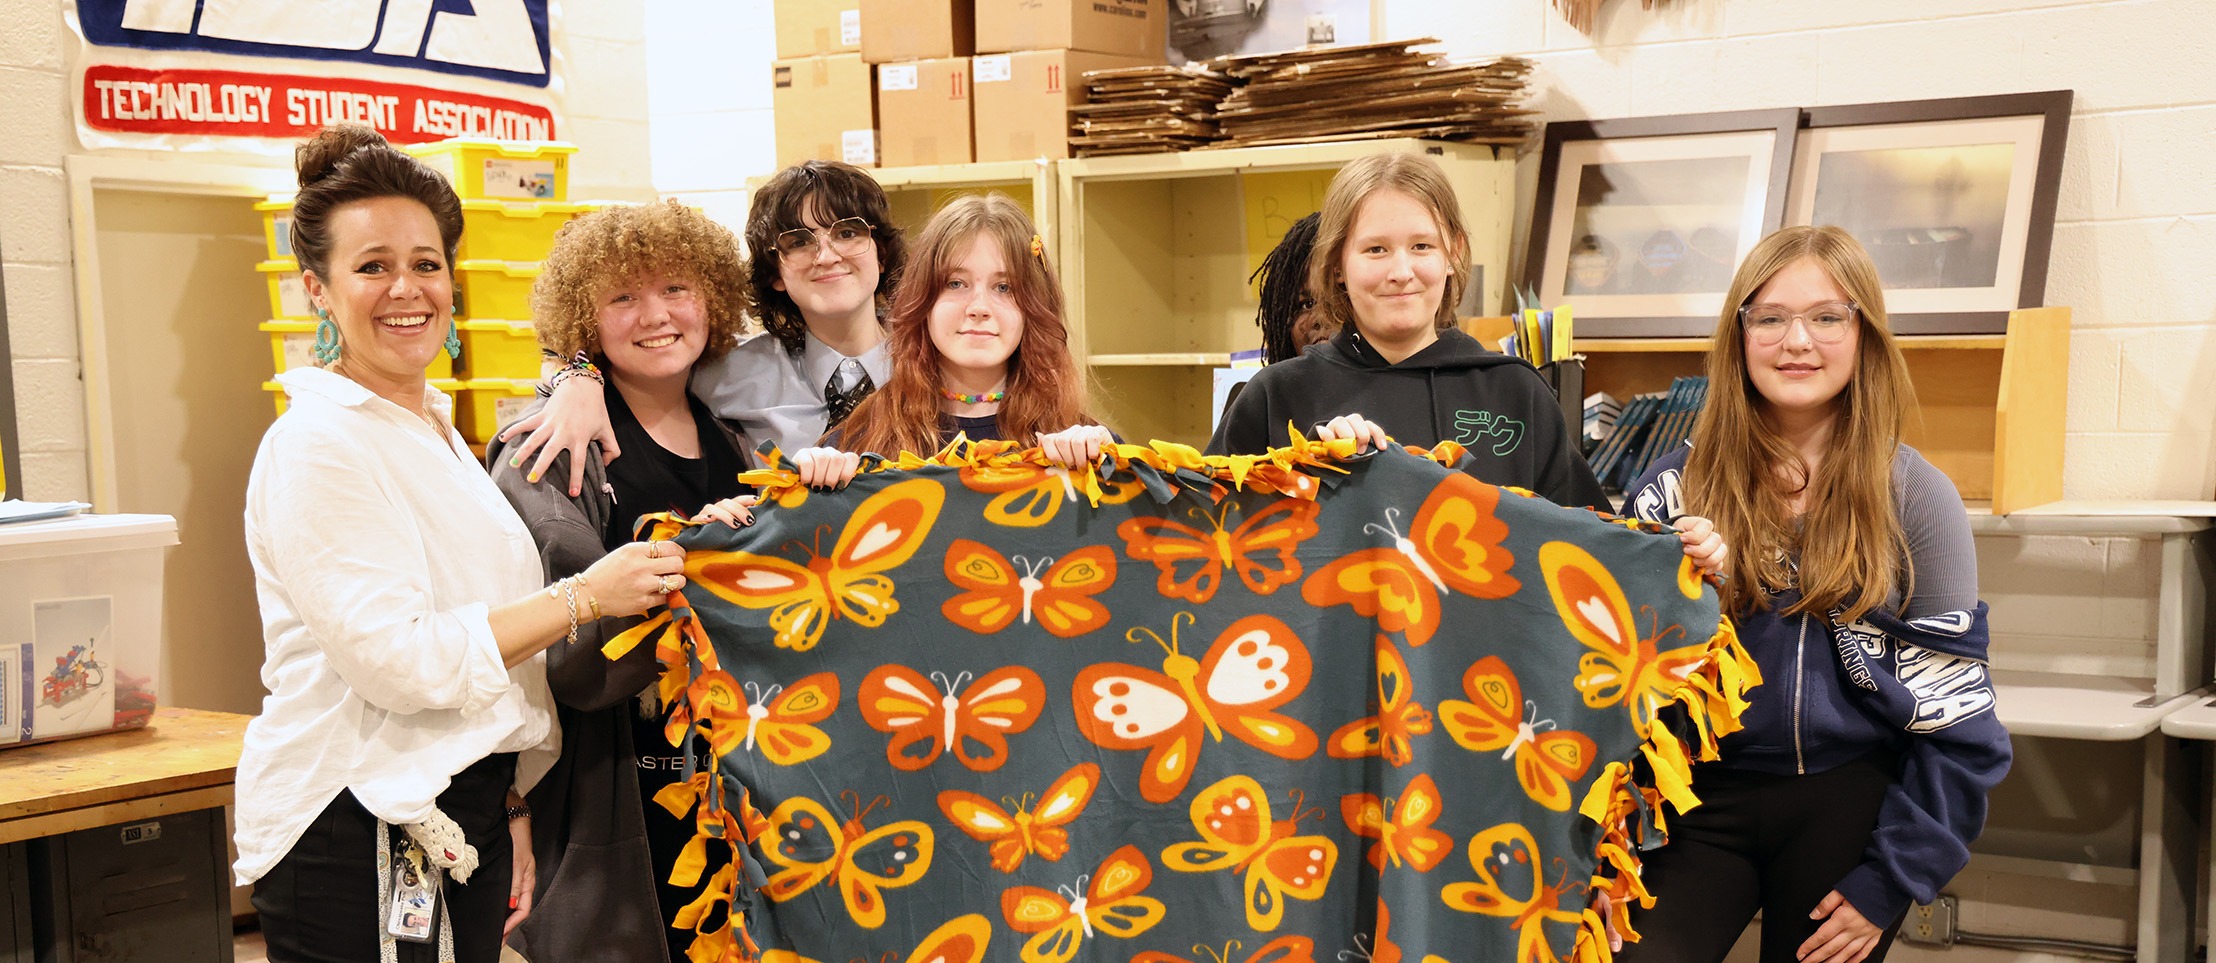 Students and teacher hold up a blanket they made for a charity